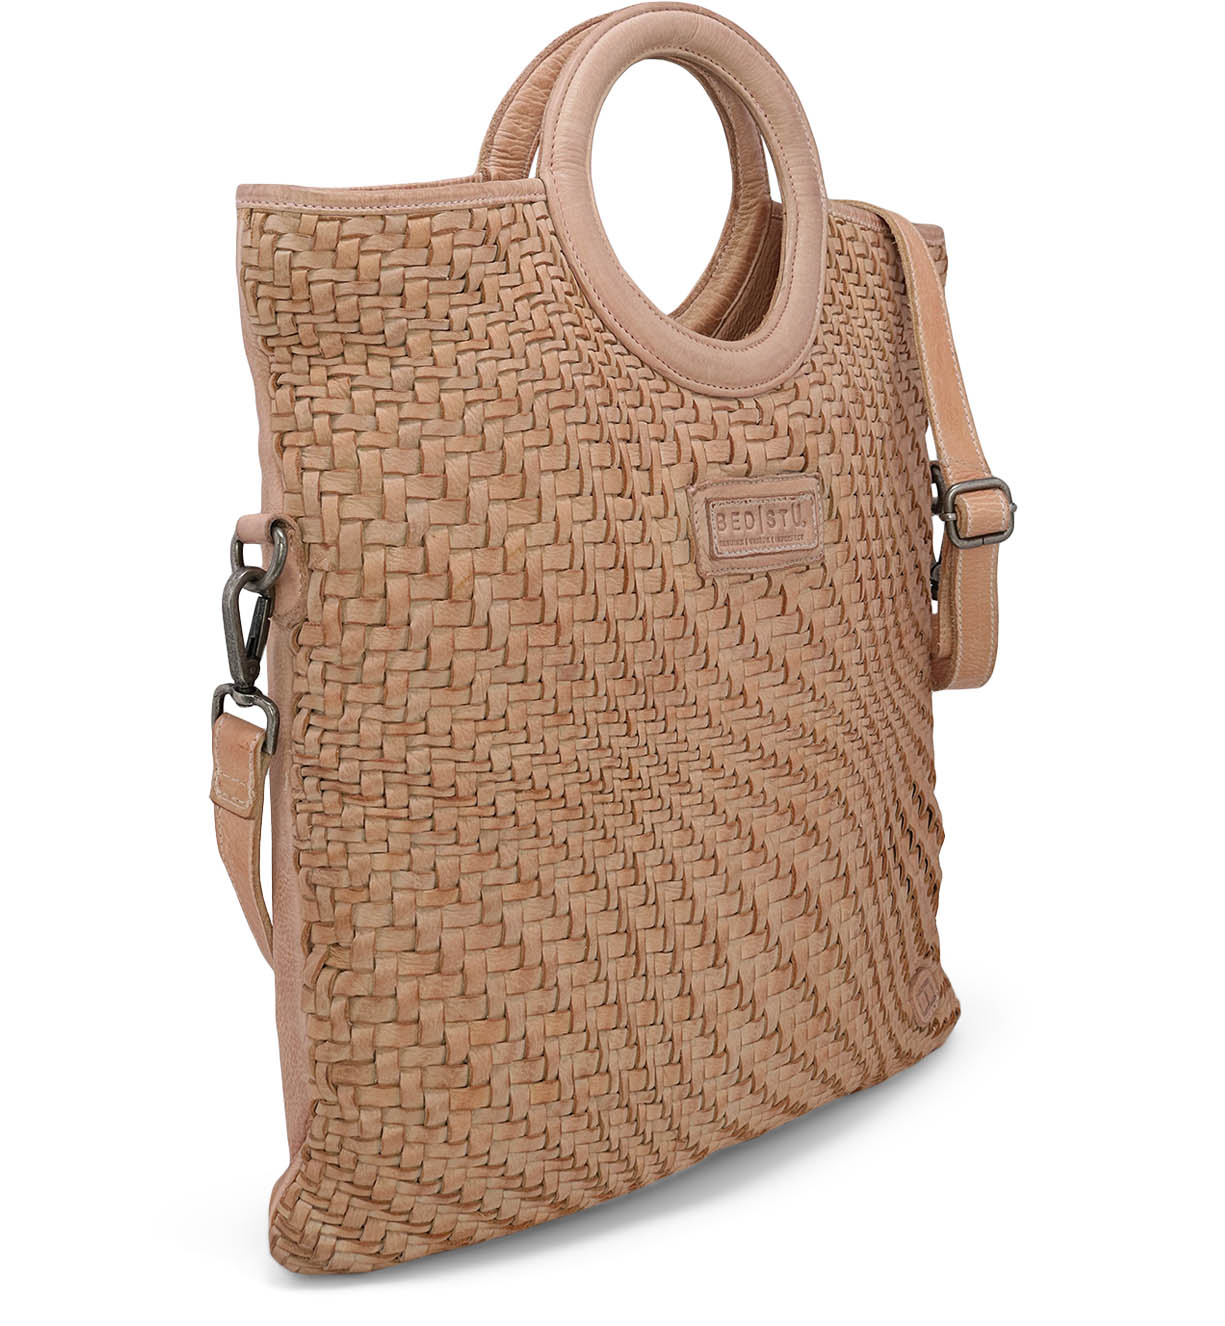 A beige woven "Adele" tote bag with a handle by Bed Stu.